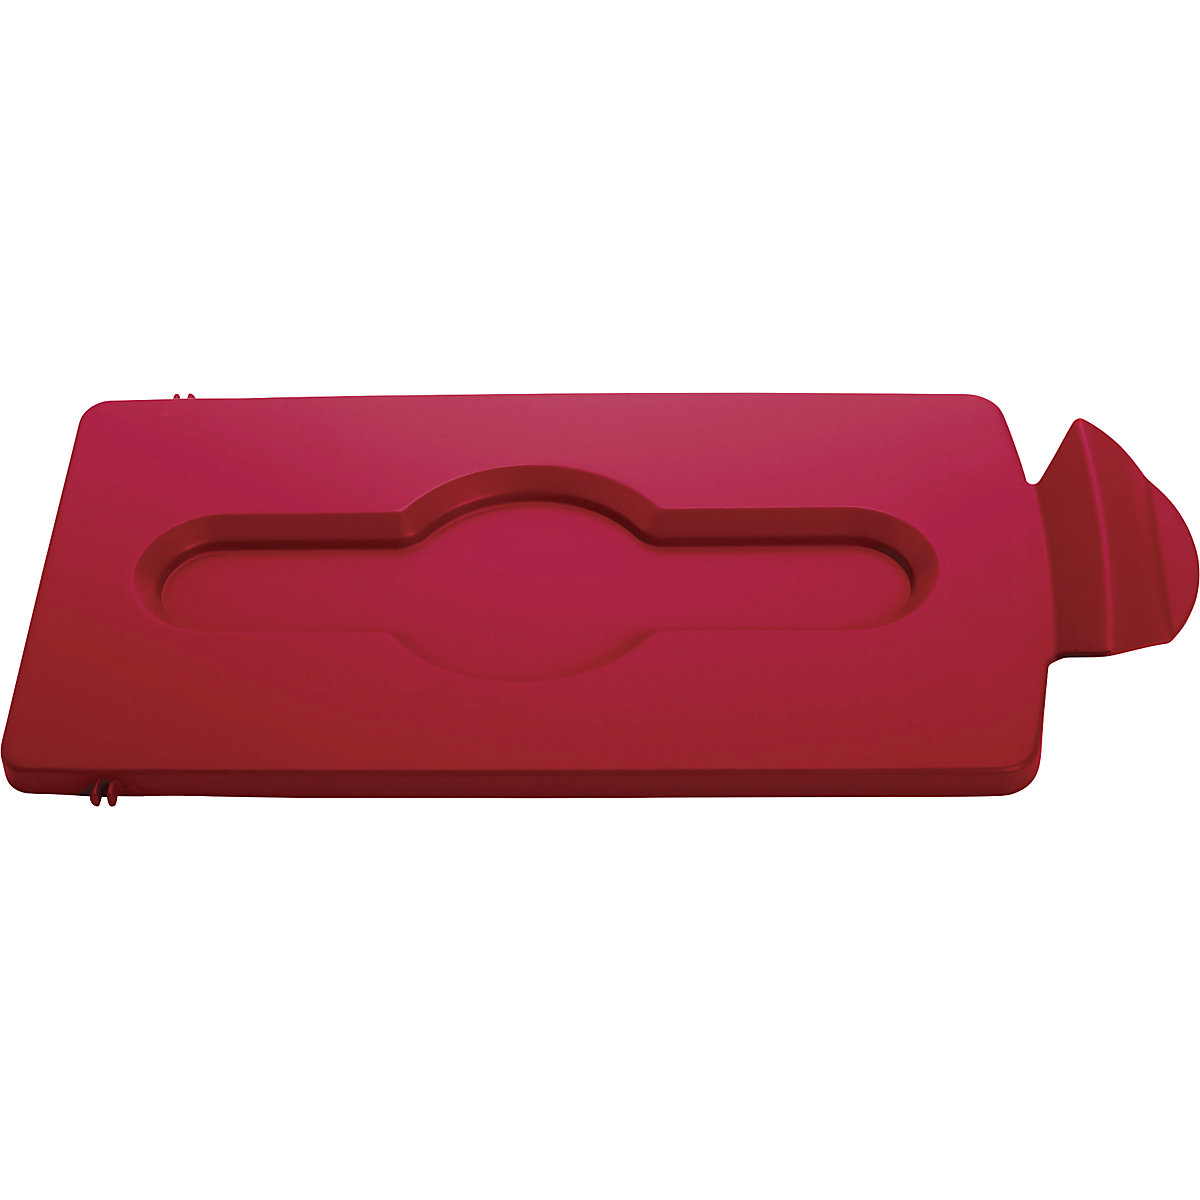 Rubbermaid – Lid insert, closed, red